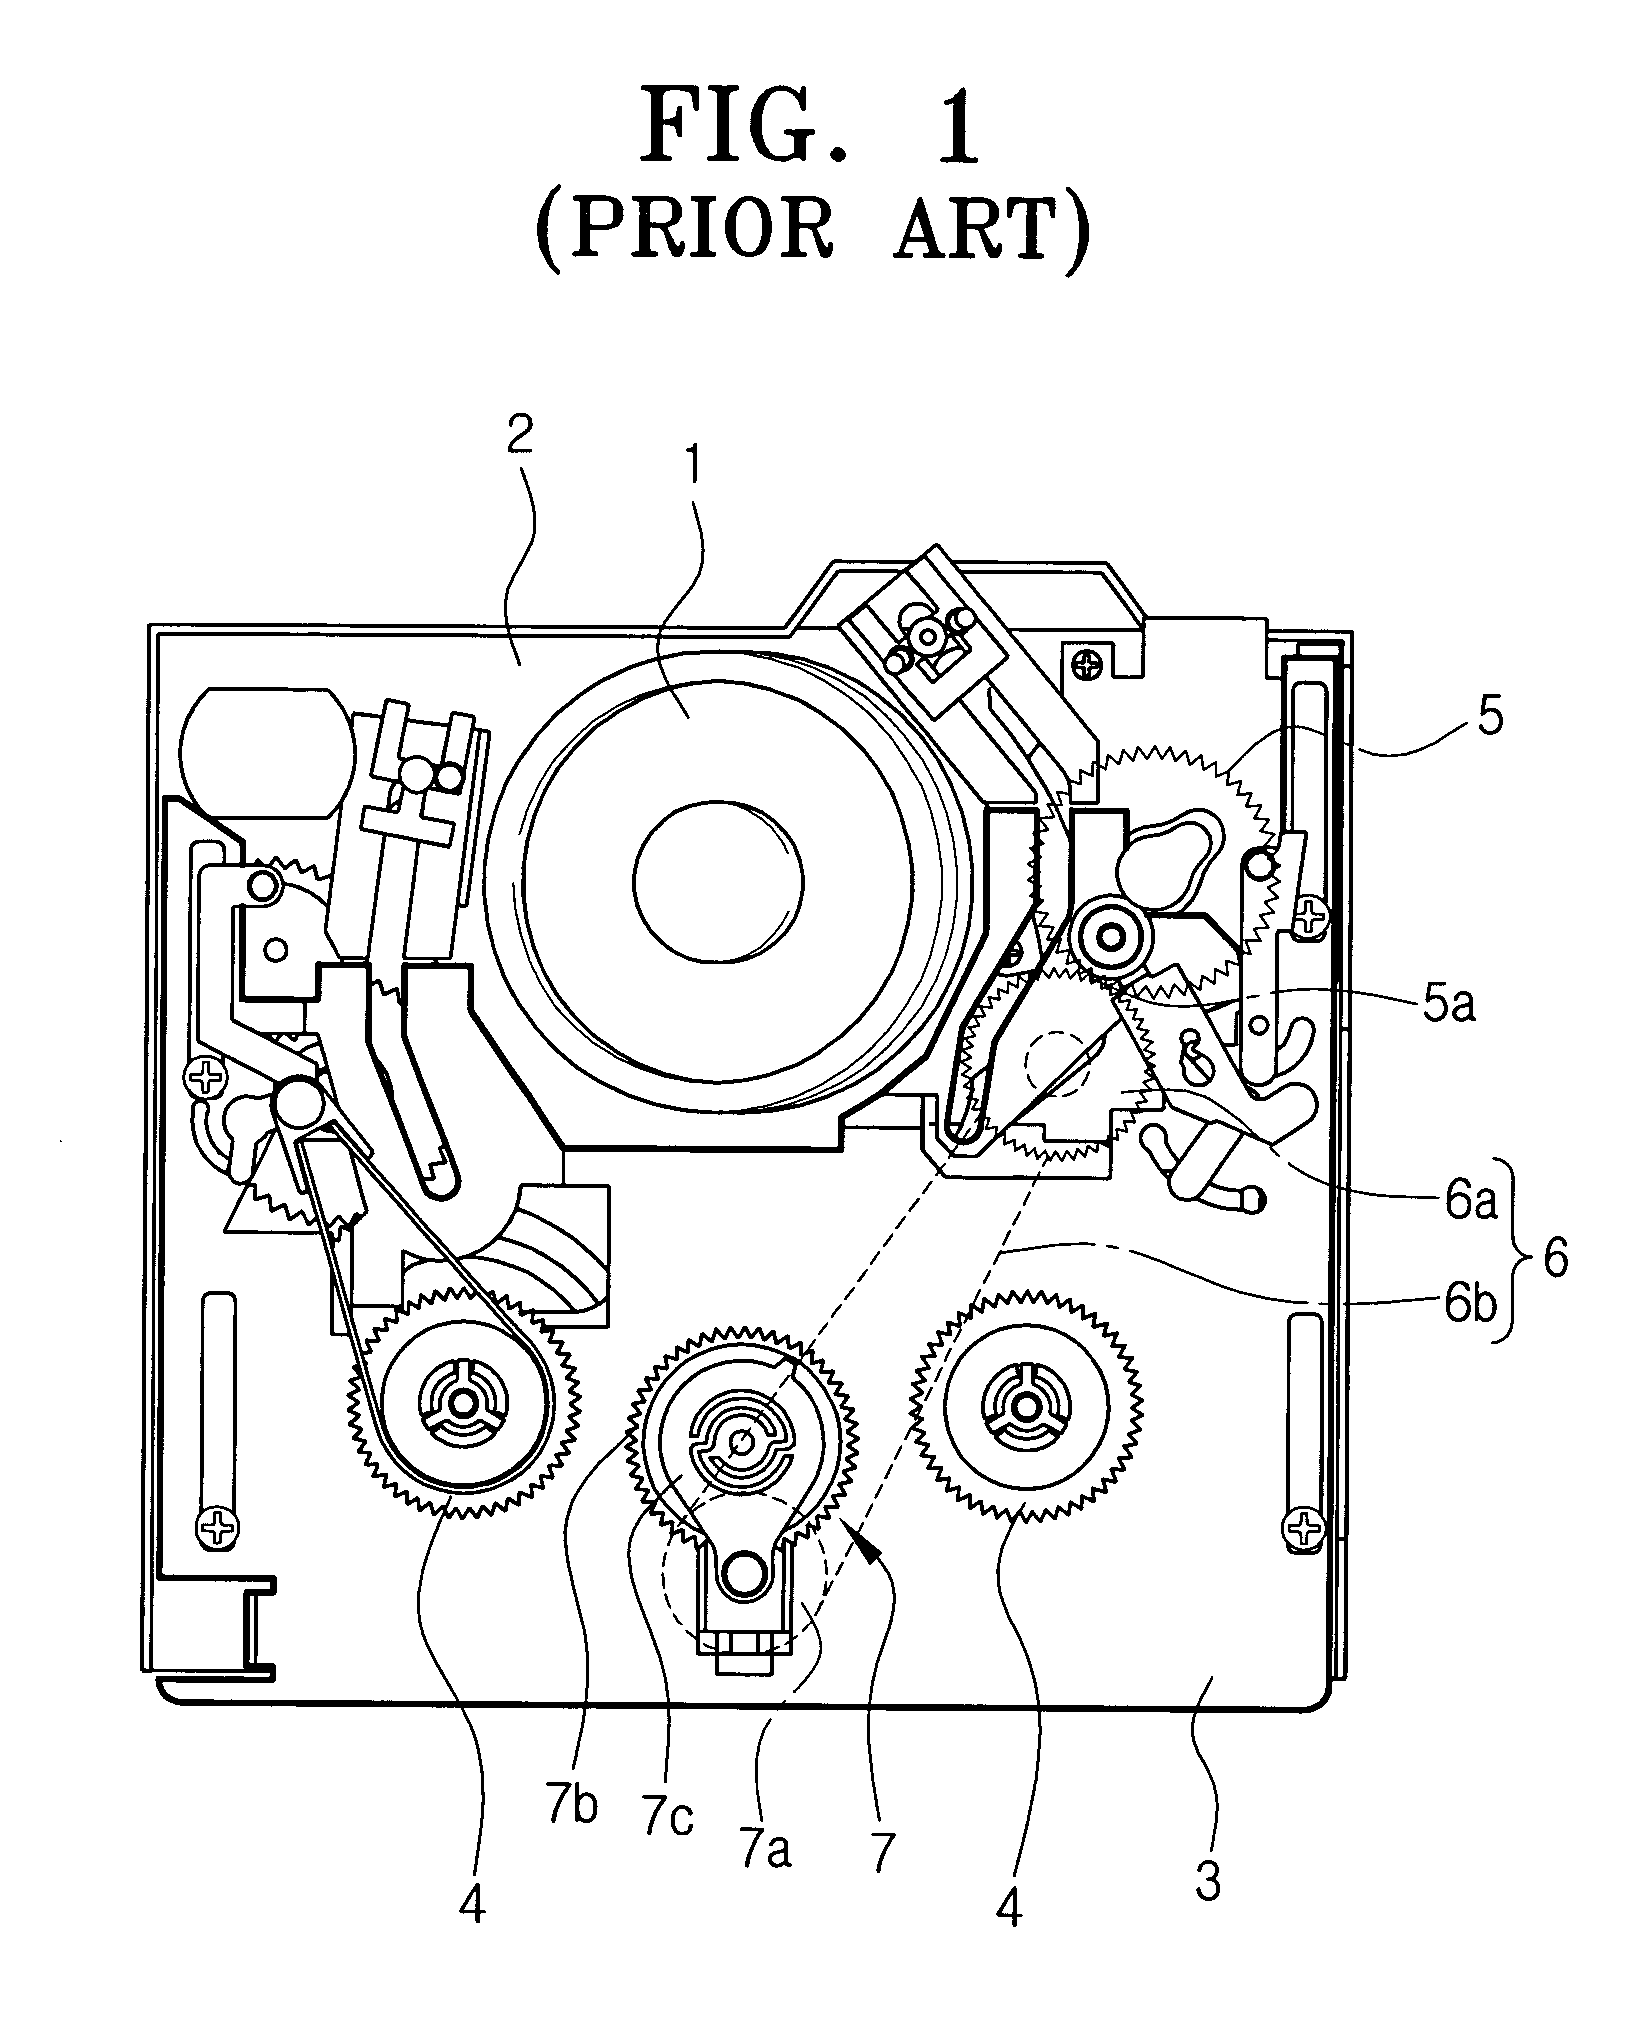 Reel clutch of a tape recorder